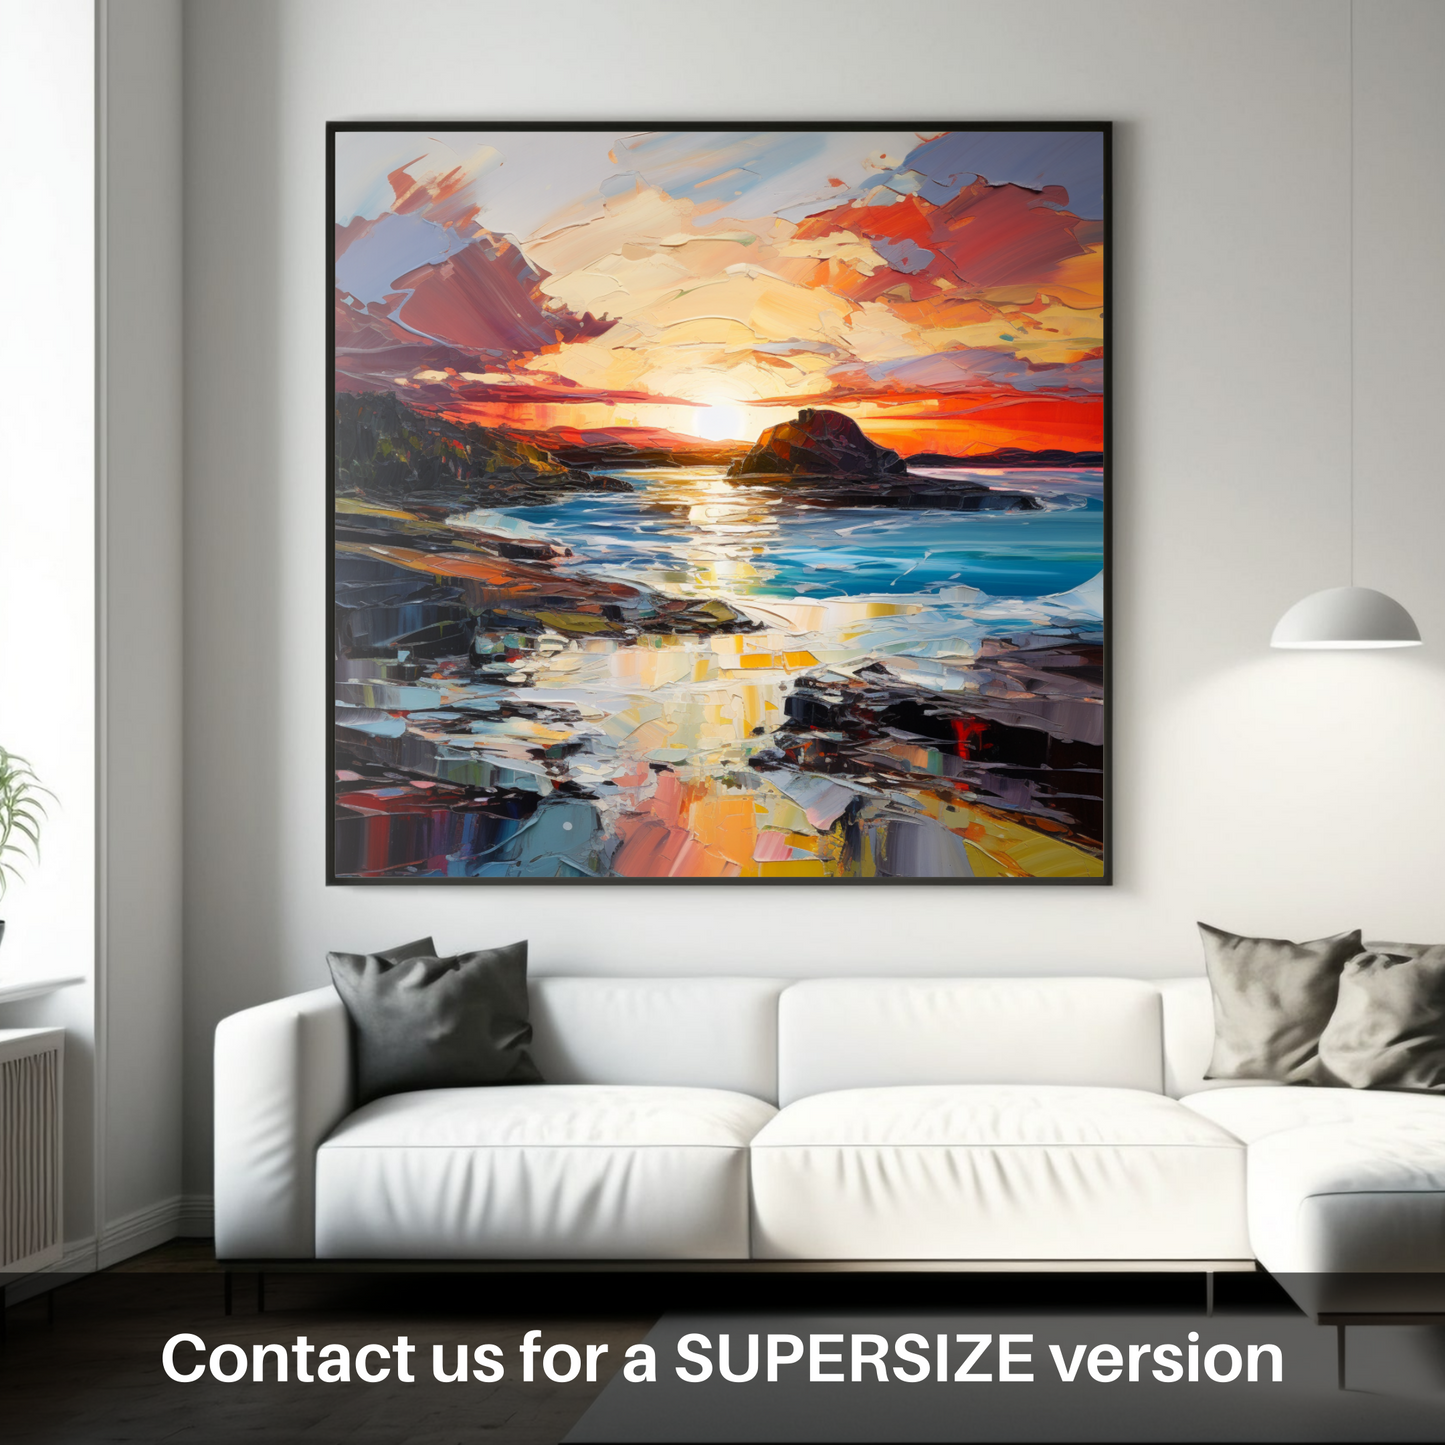 Painting and Art Print of Catterline Bay at golden hour. Golden Hour Majesty at Catterline Bay.